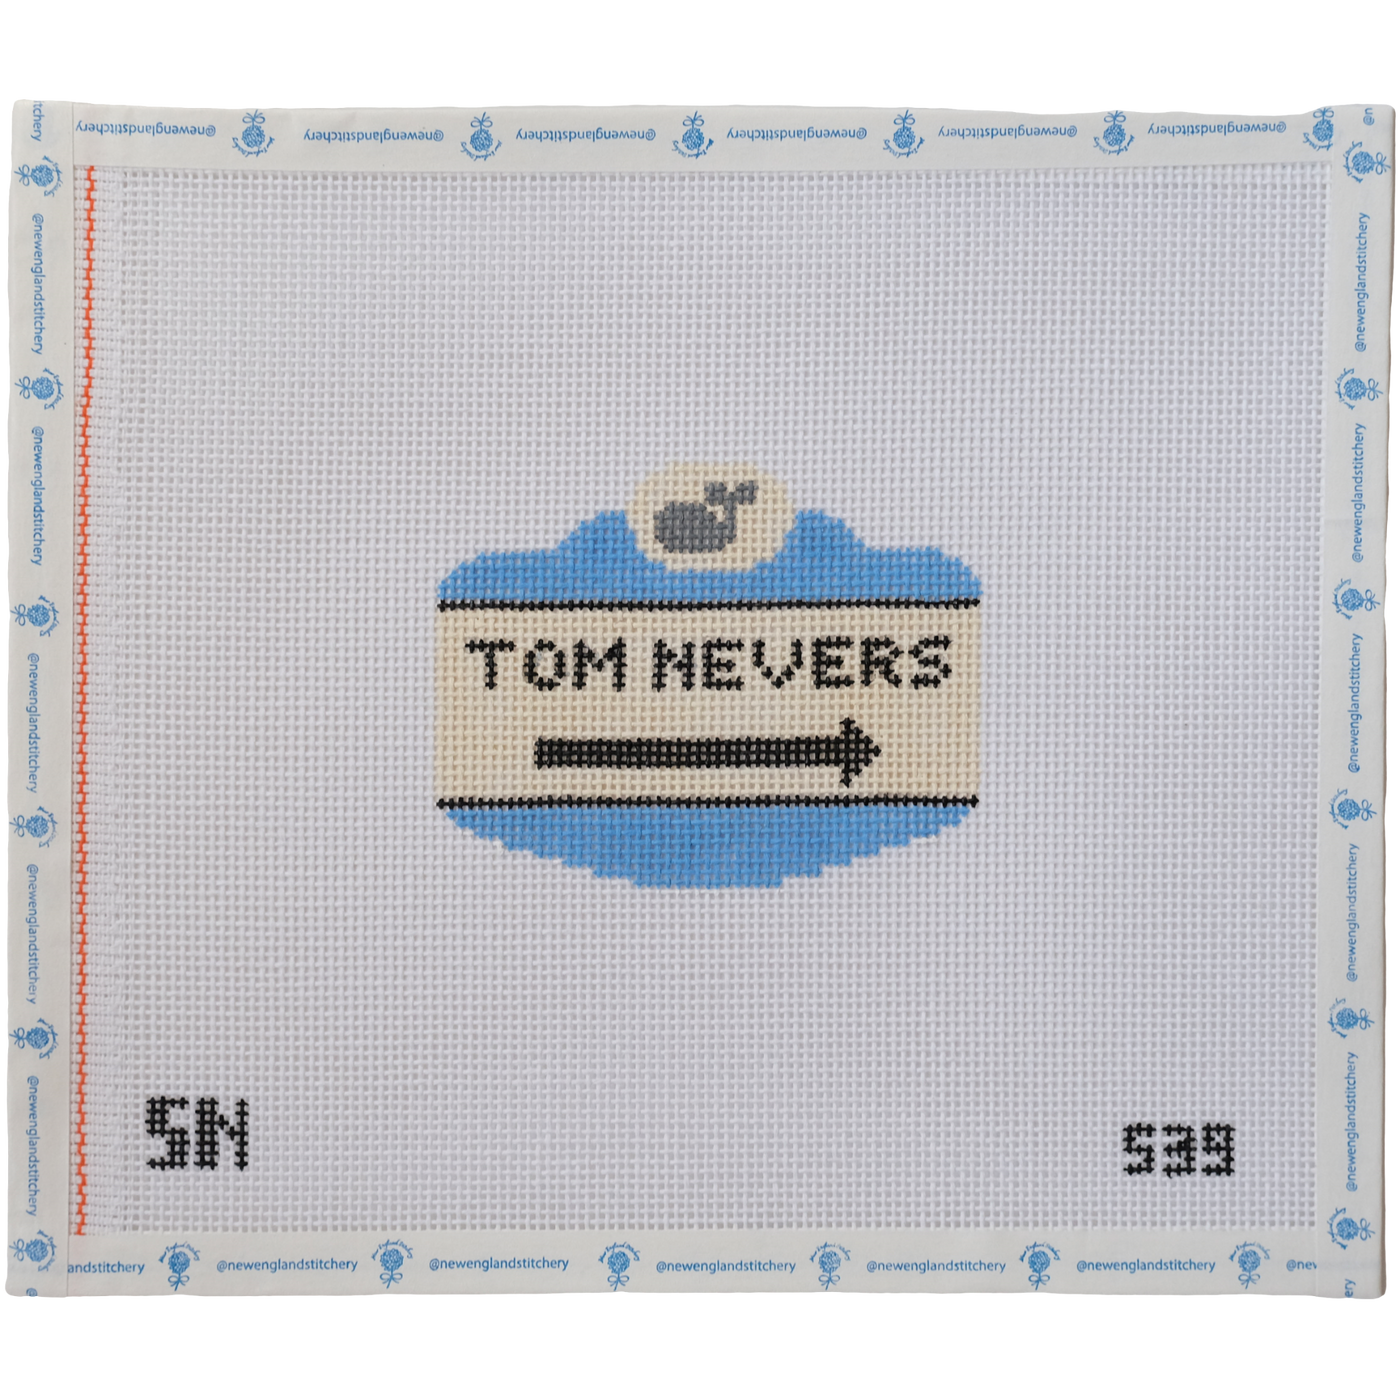 Tom Nevers Sign